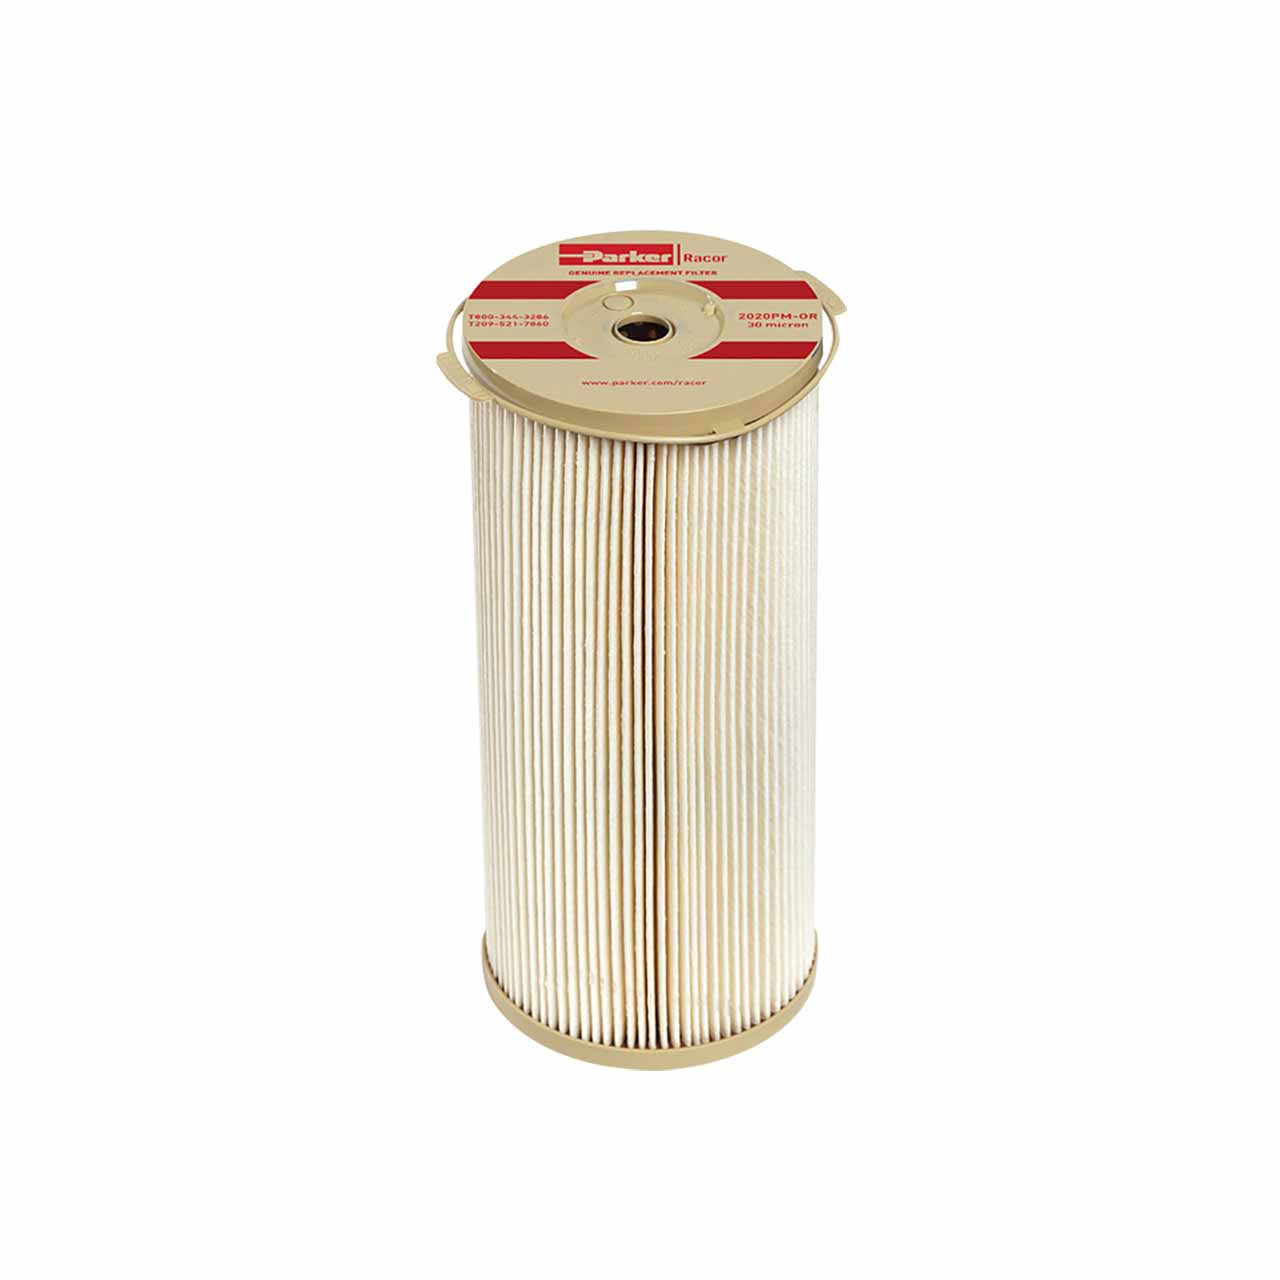 2020N-30 Racor Parker Replacement Filter Element (30 micron) 1000 Turbine Series